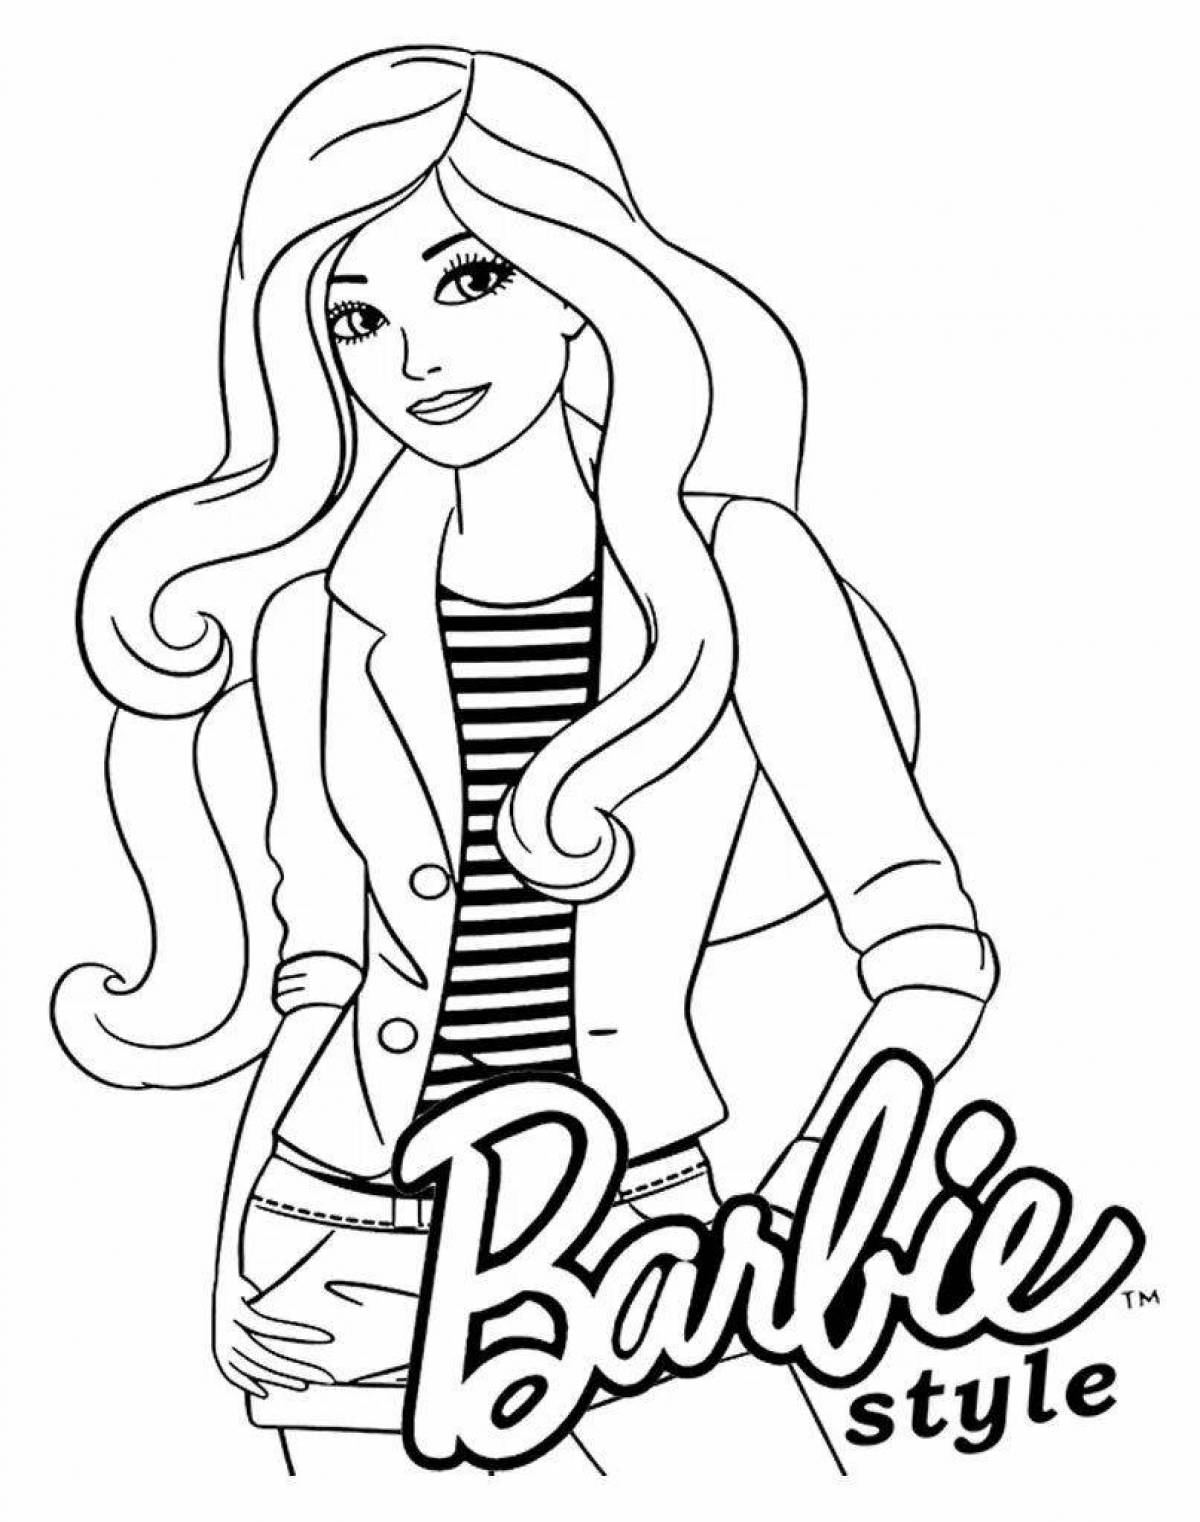 Dazzling barbie doctor coloring book